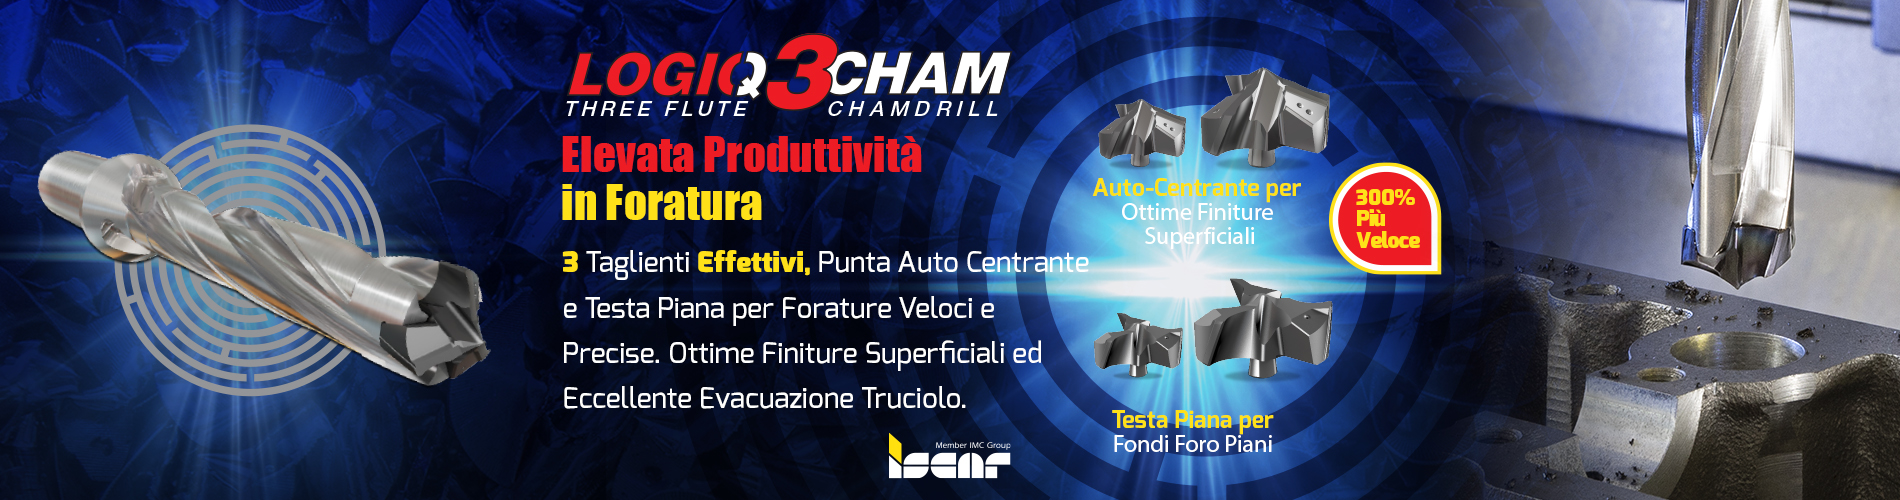 LOGIQ3CHAM_Banners_ITALY